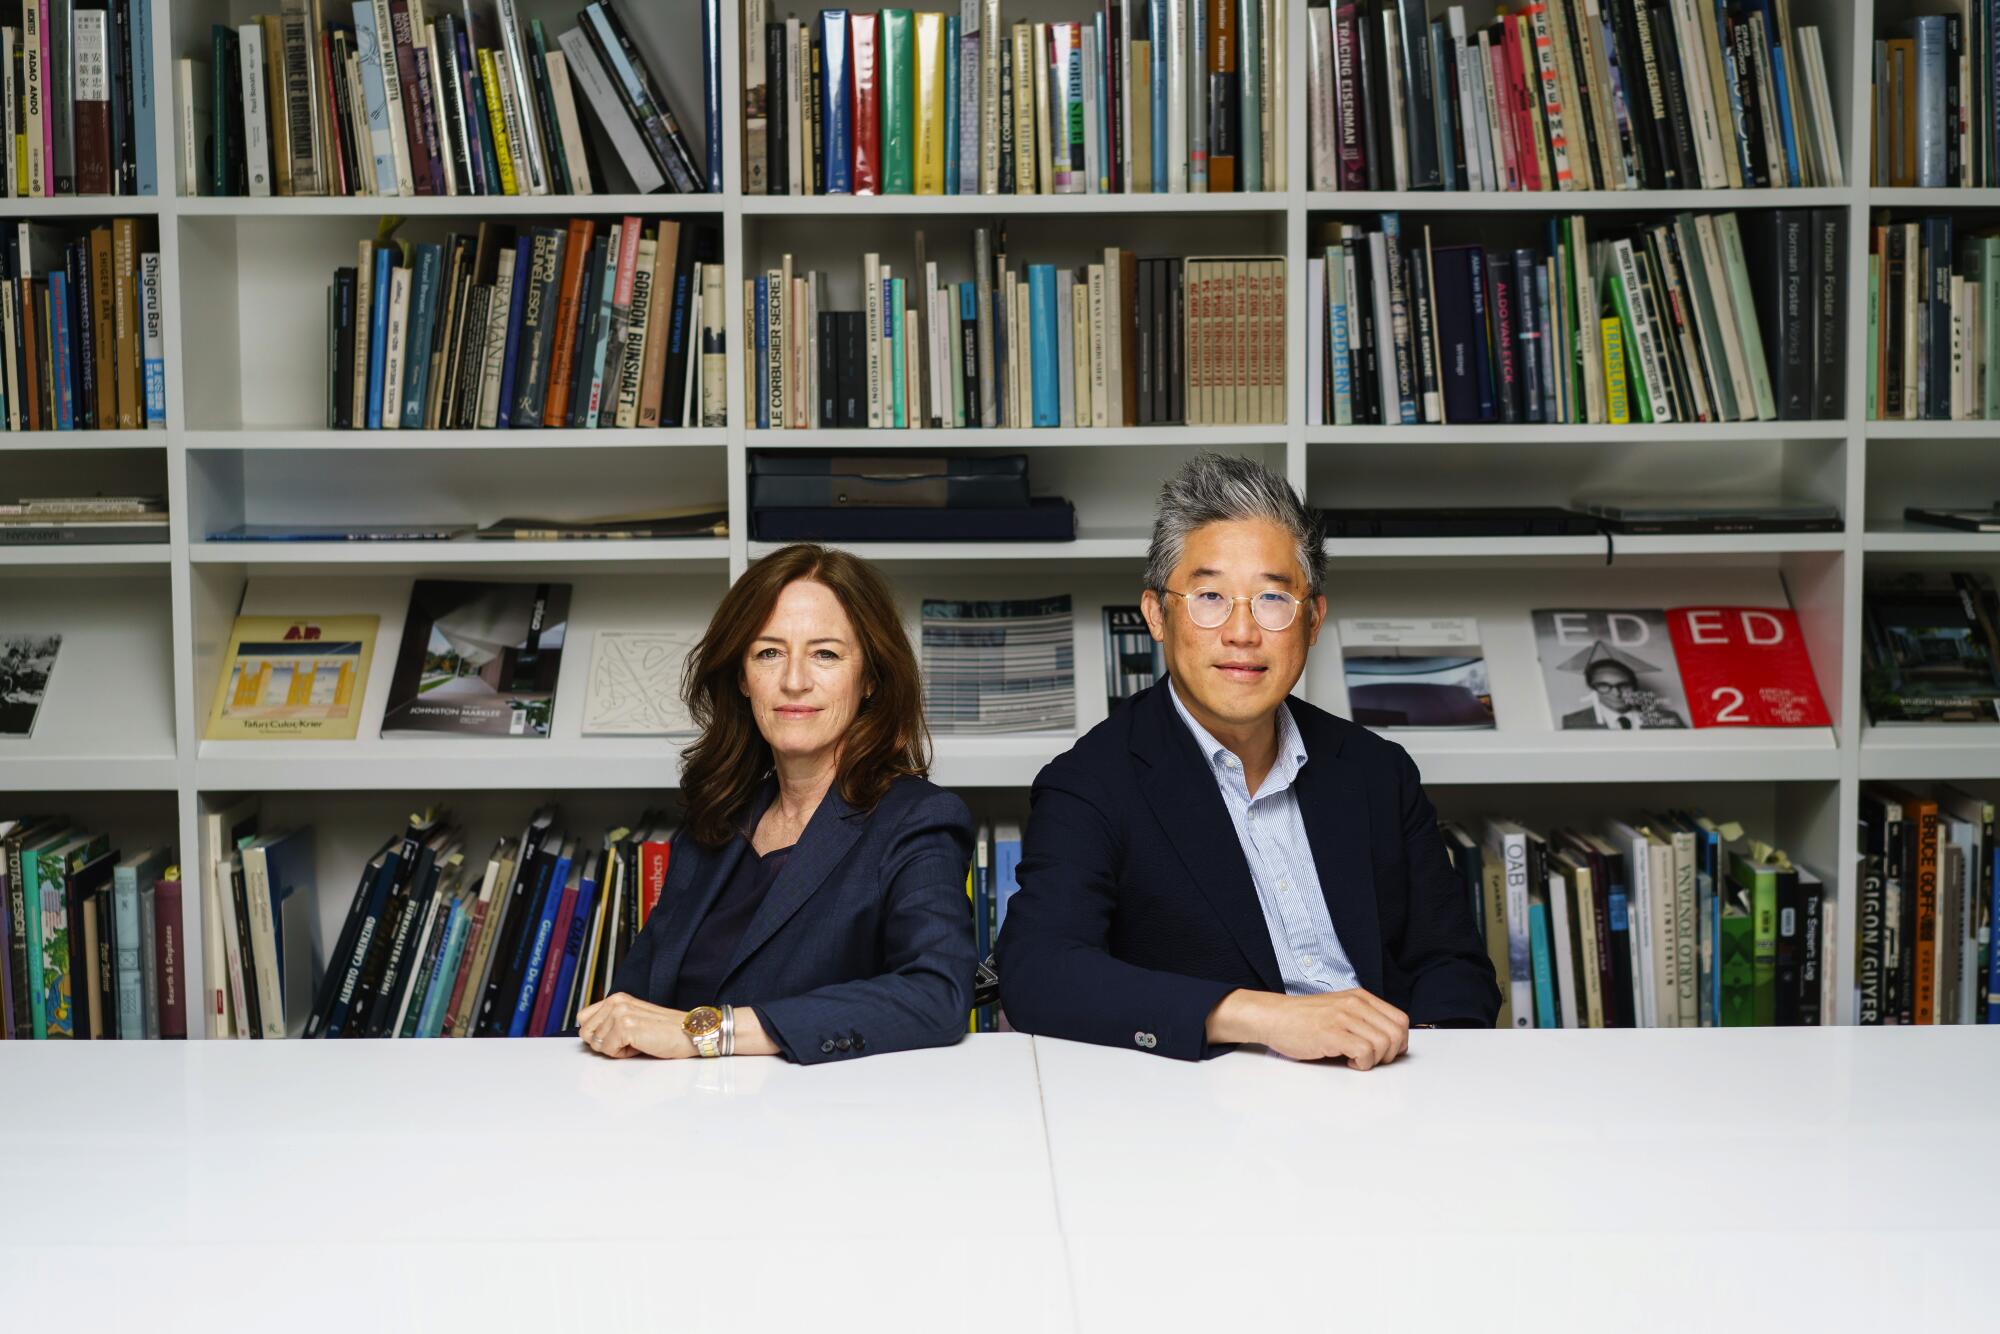 Sharon Johnston and Mark Lee in their studio's library in 2019.